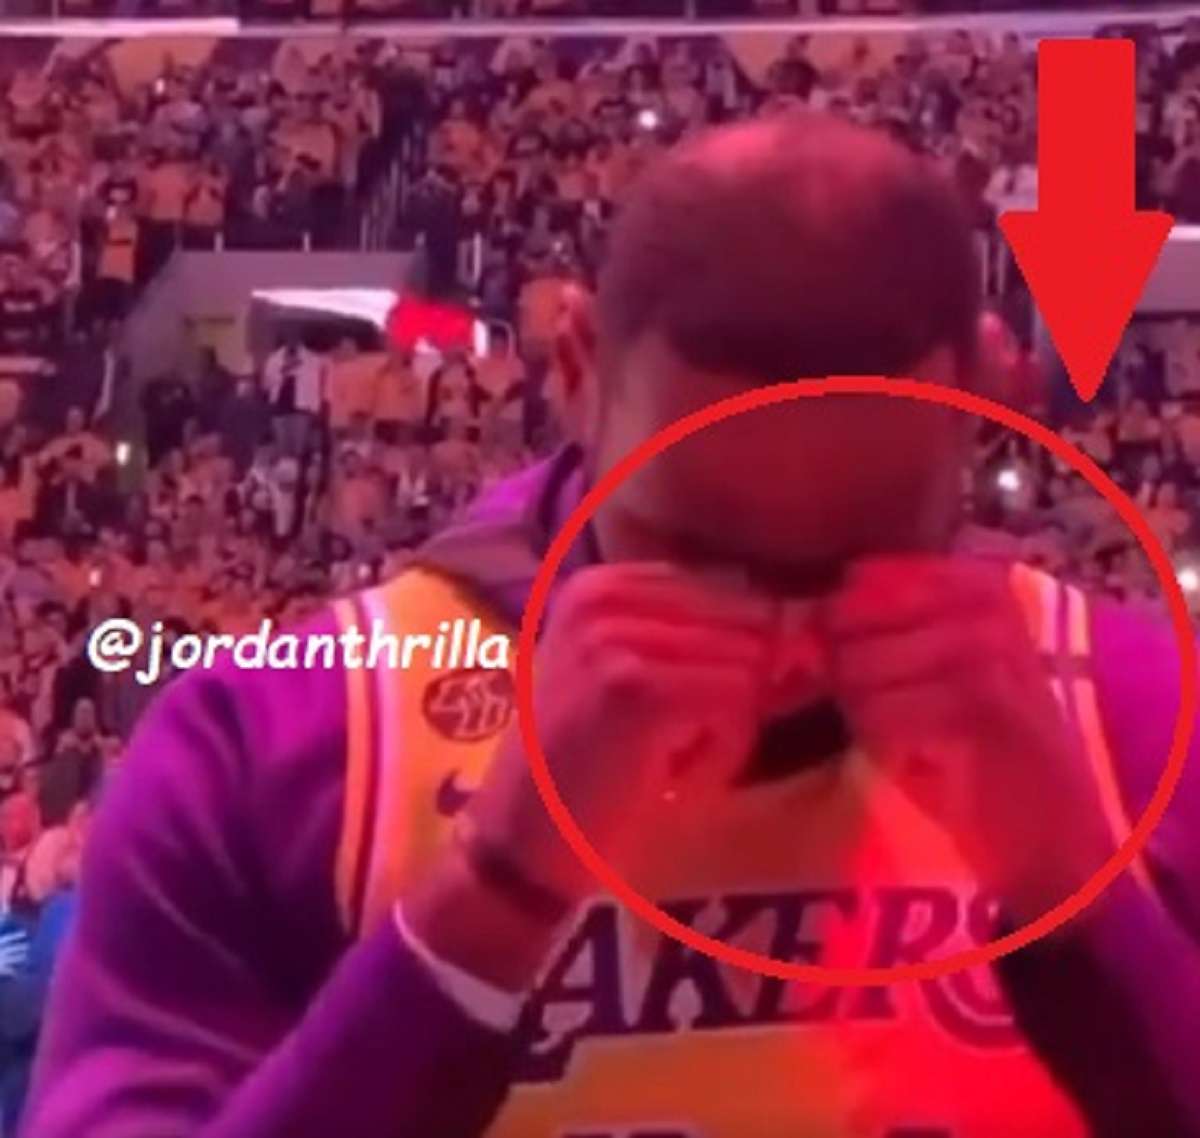 Lebron James Throws Up Illuminati Sign and Devil 666 During Kobe Bryant Death Ceremony Conspiracy